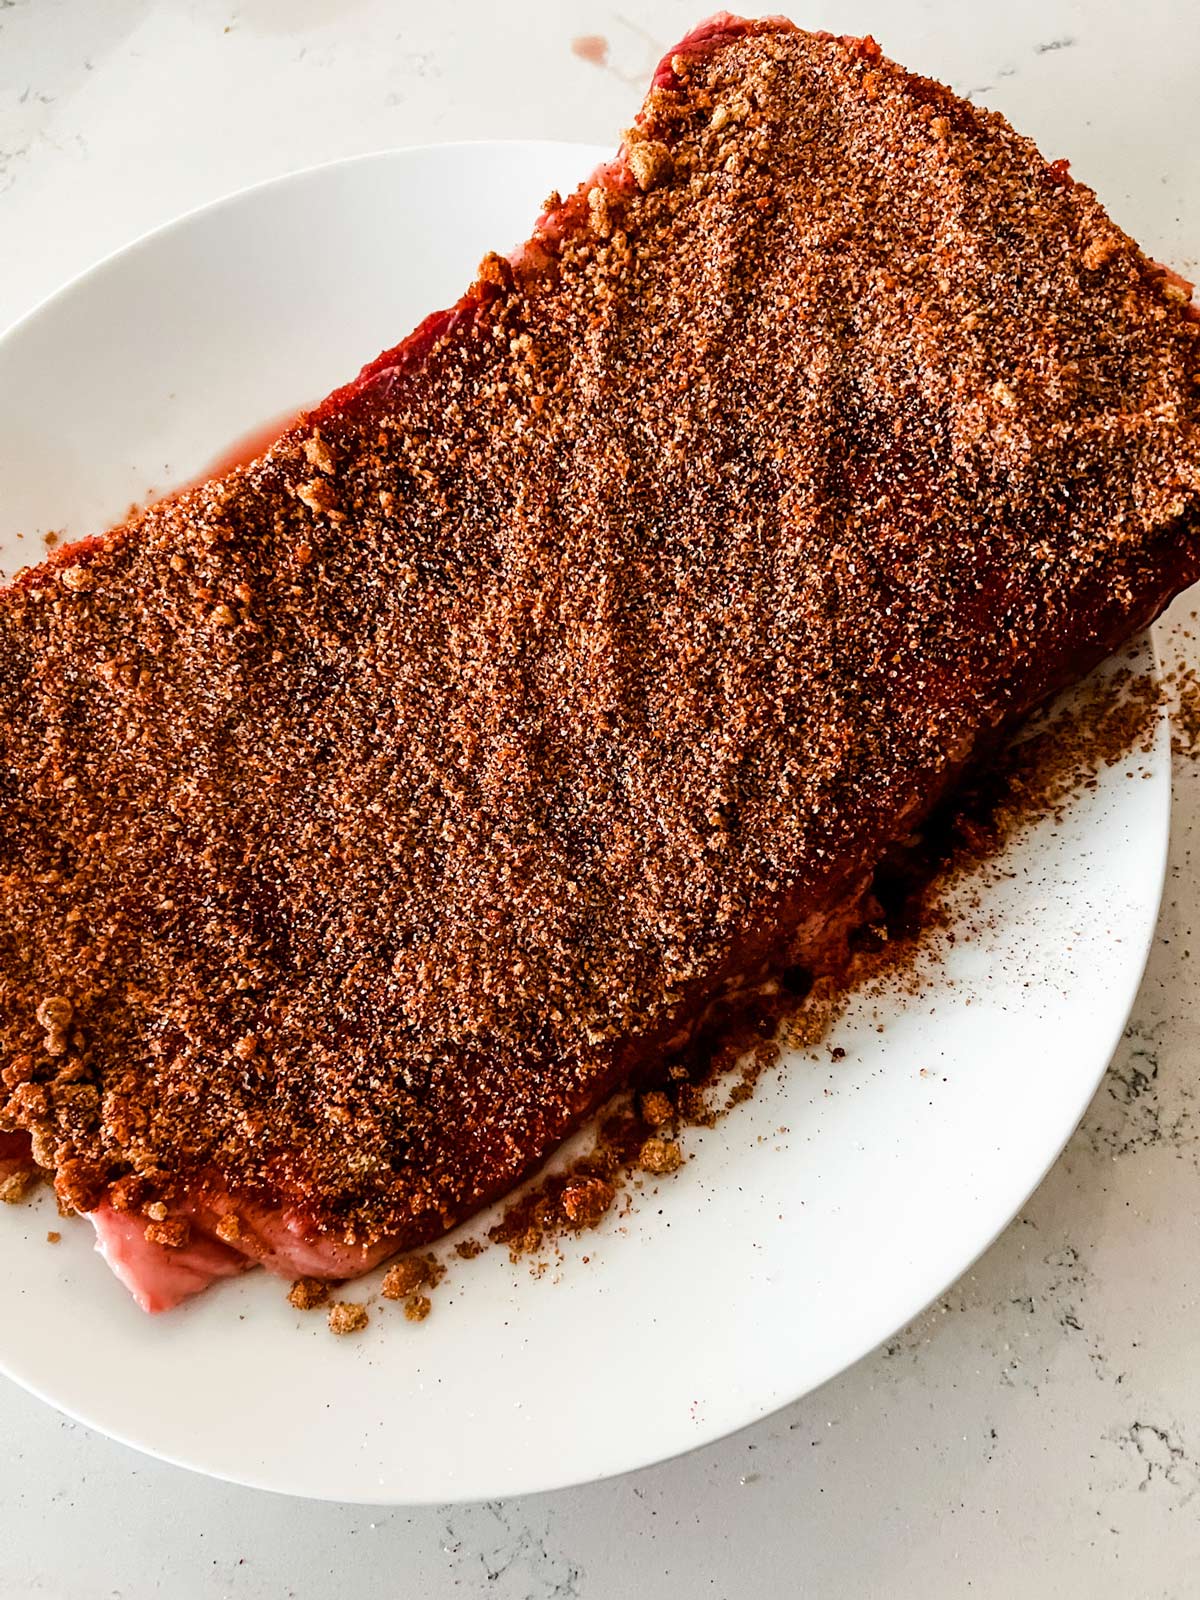 A brisket covered with dry rub on a white plate.